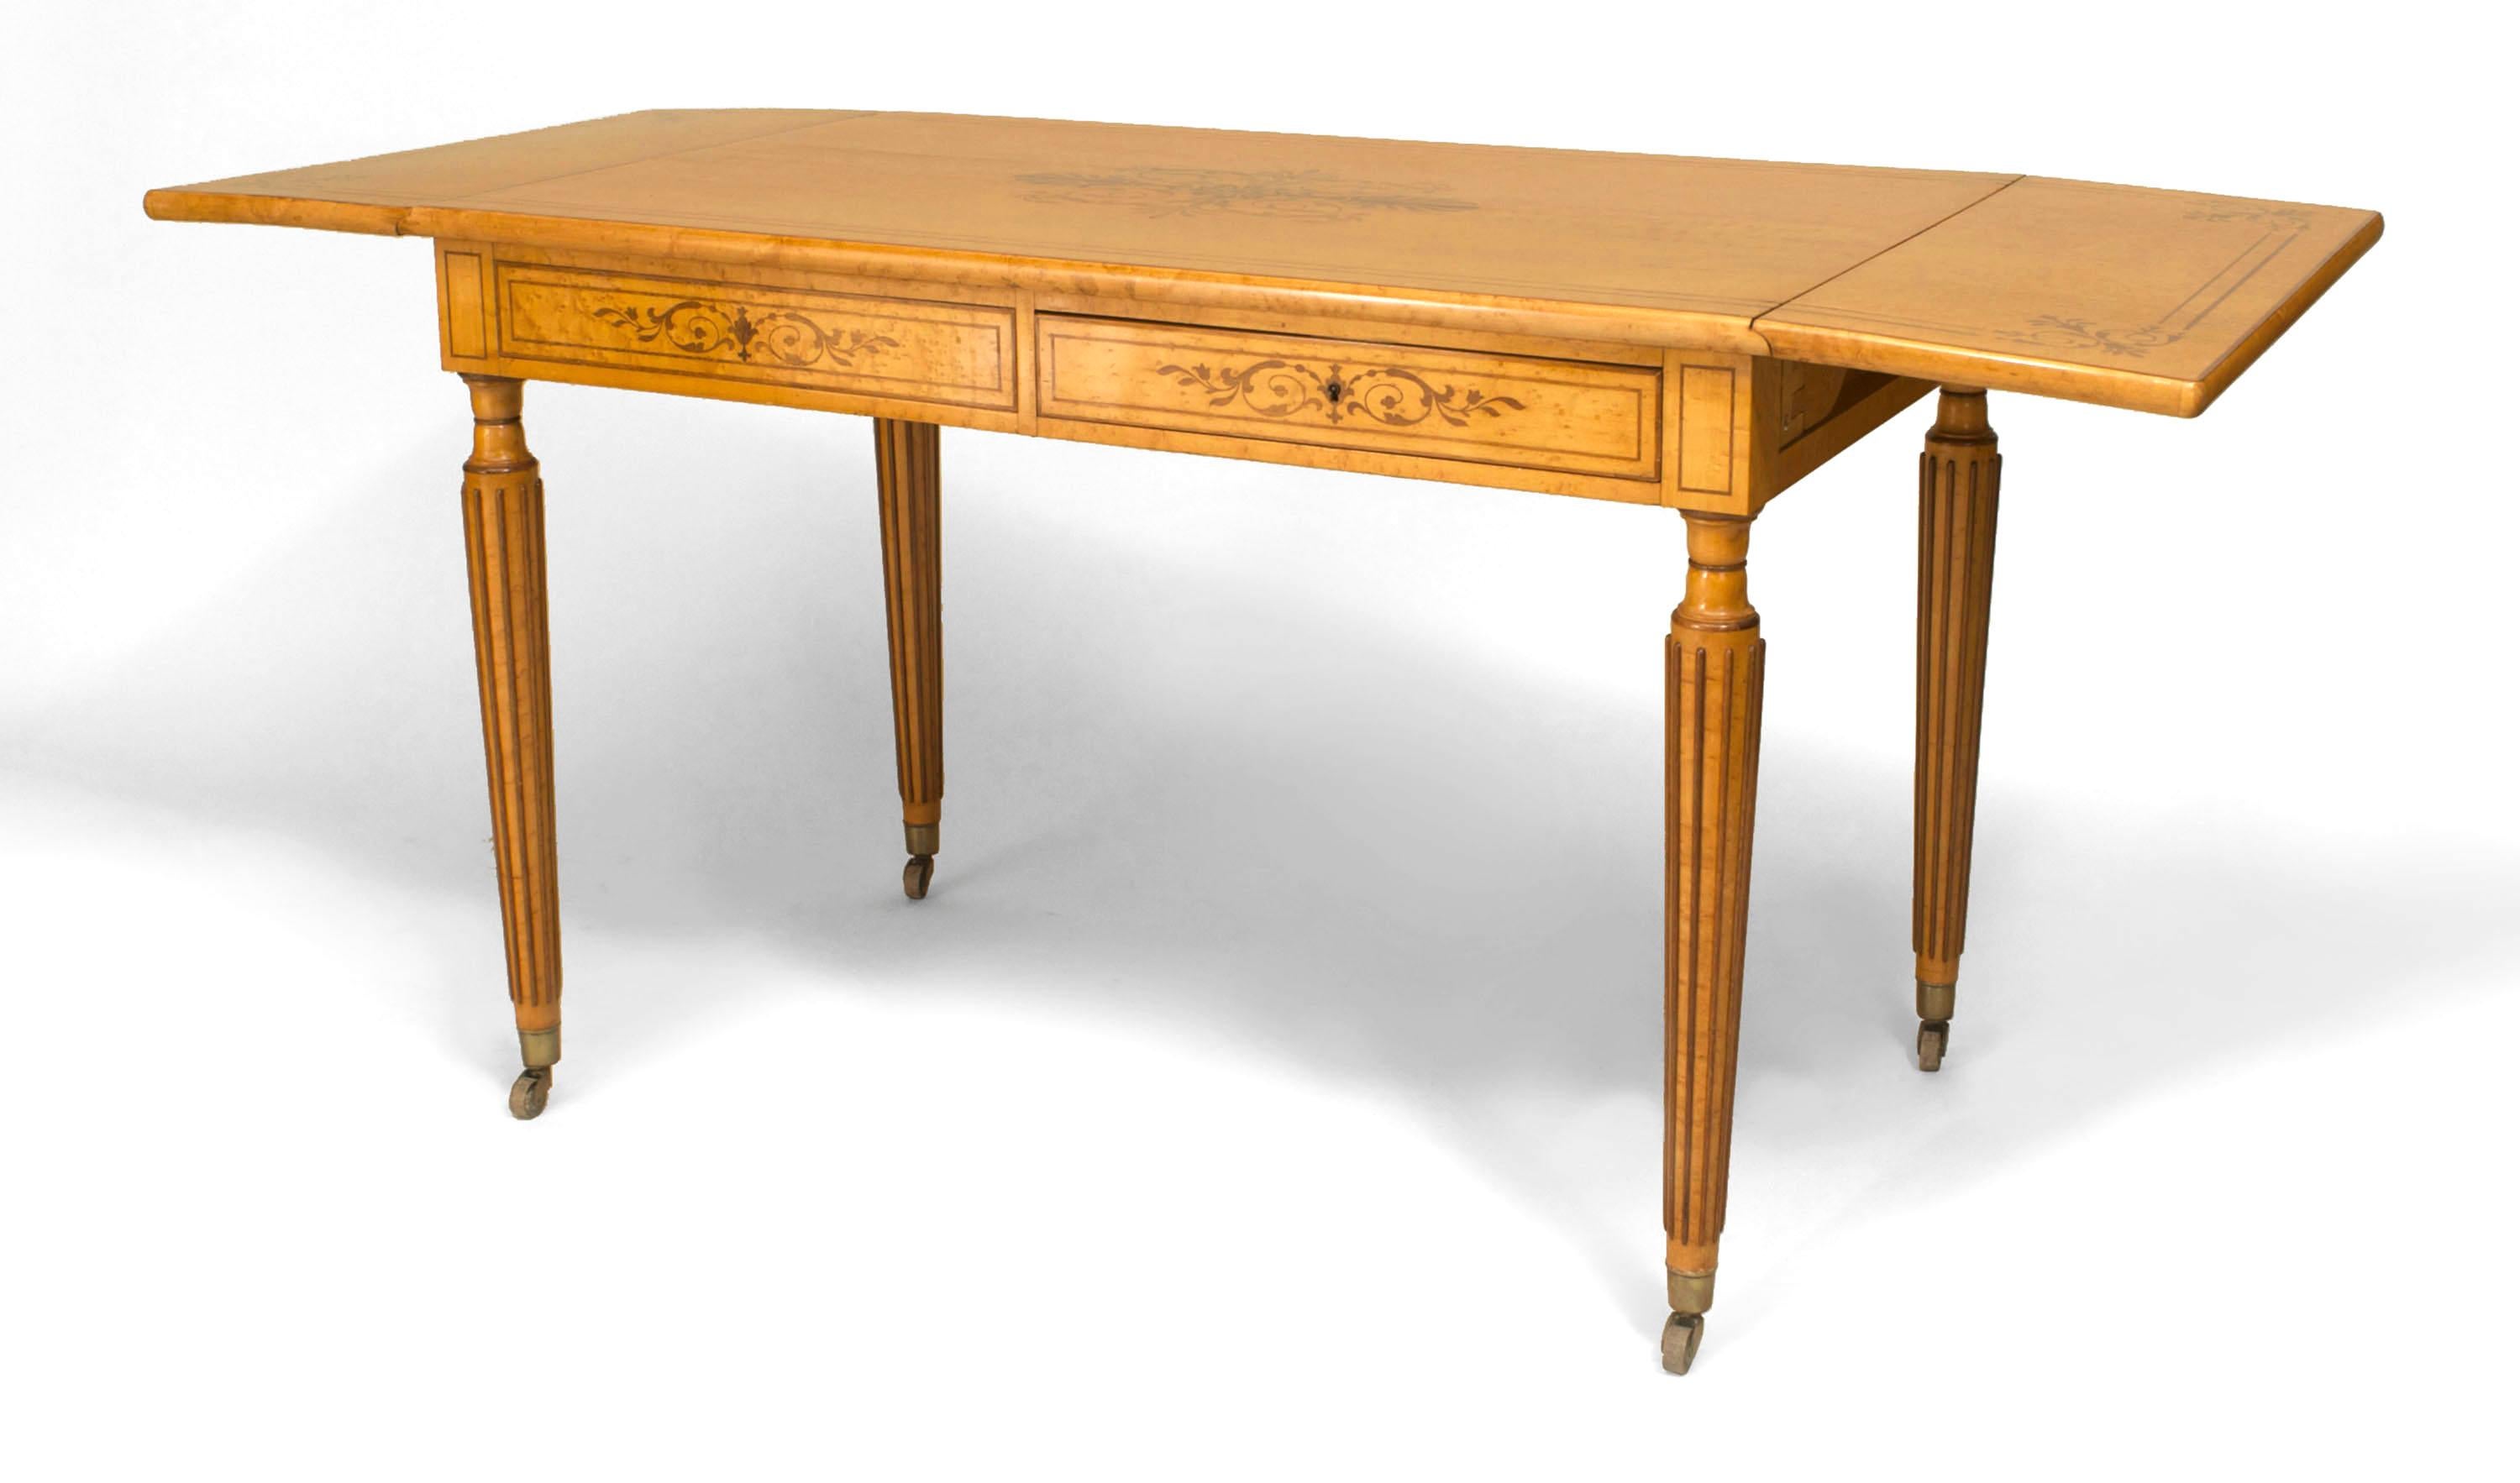 French Charles X bird’s-eye maple davenport table desk with amaranth marquetry inlaid top and drop sides supported on 4 tapered fluted legs with a single drawer on front and back.